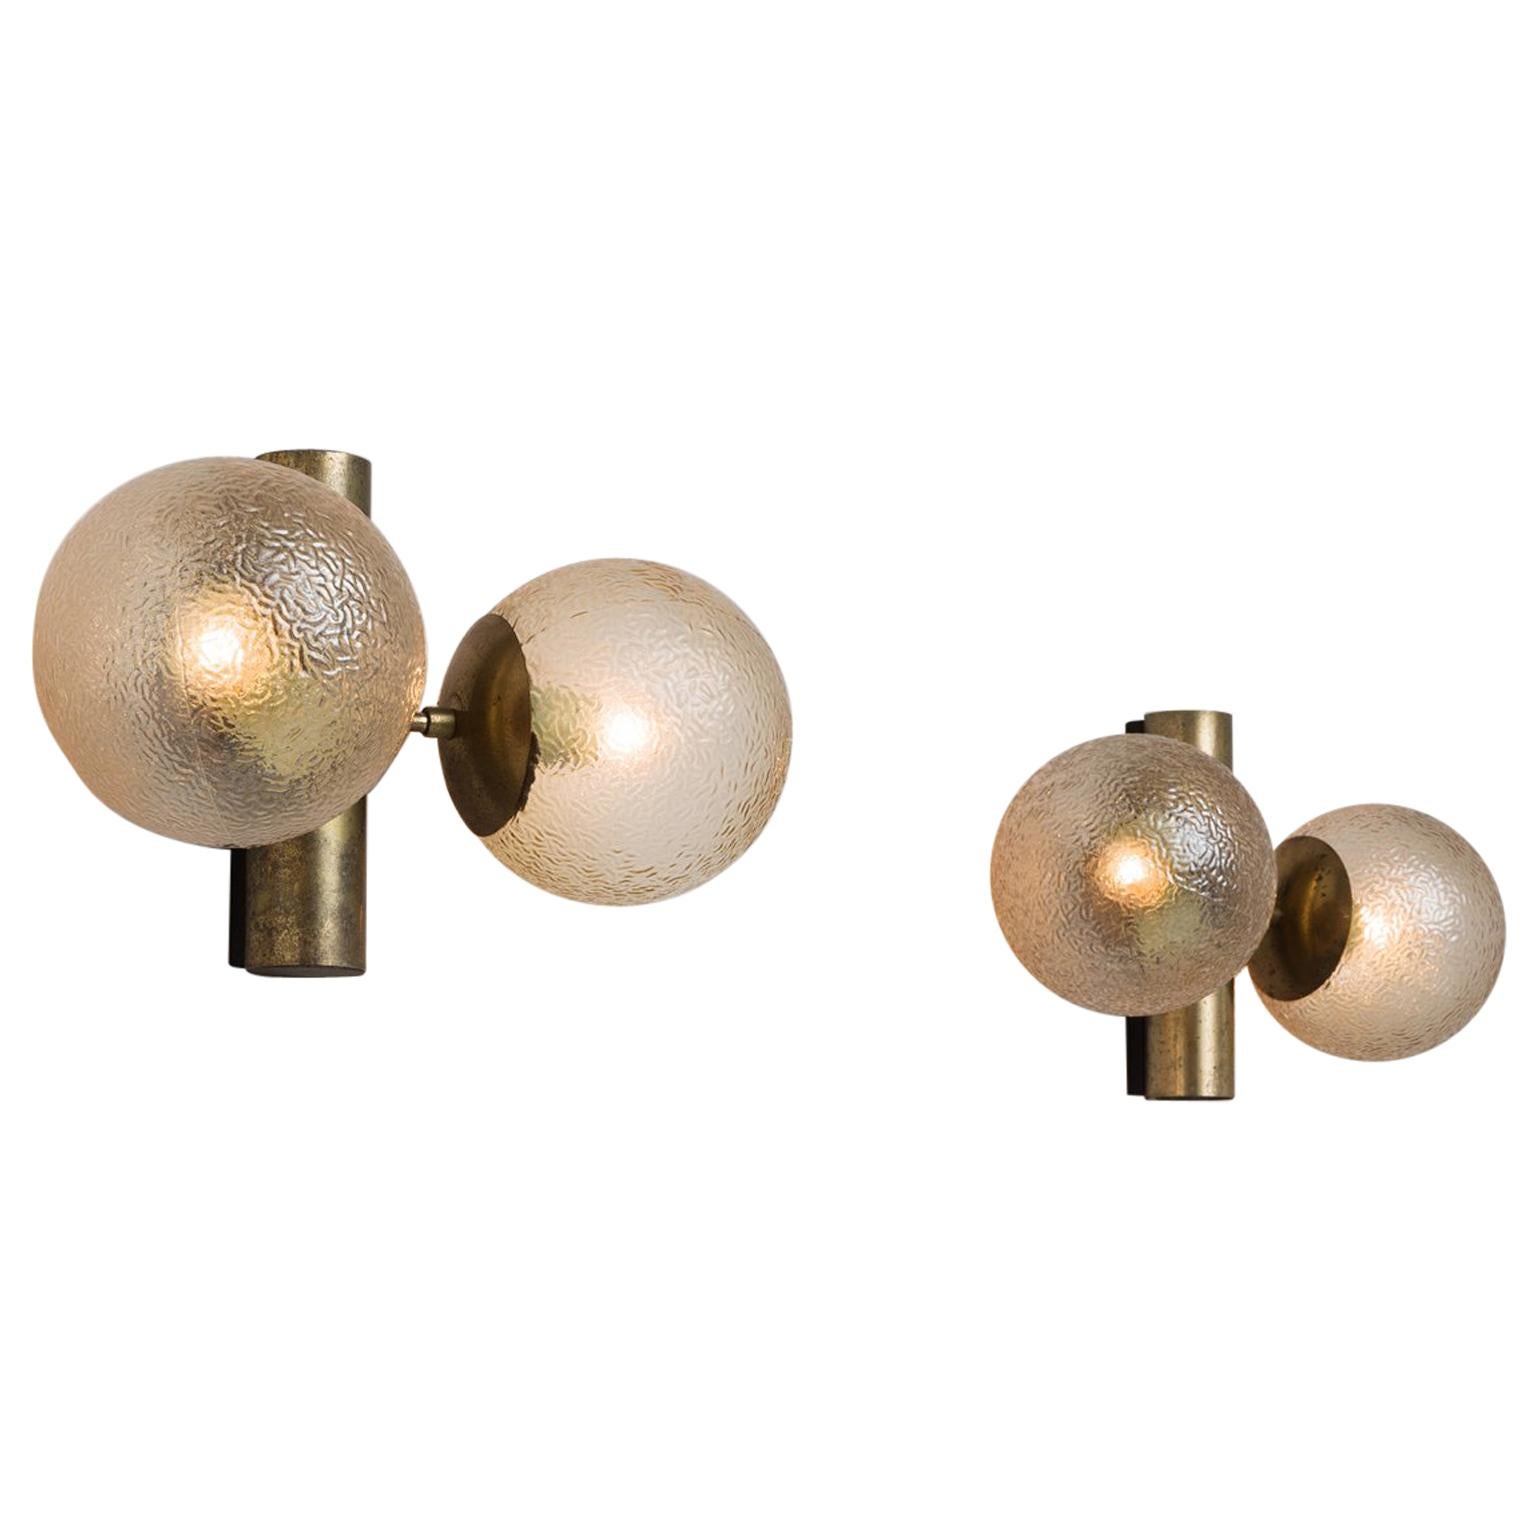 Pair of Brass Colored Wall Lights with Structured Glass